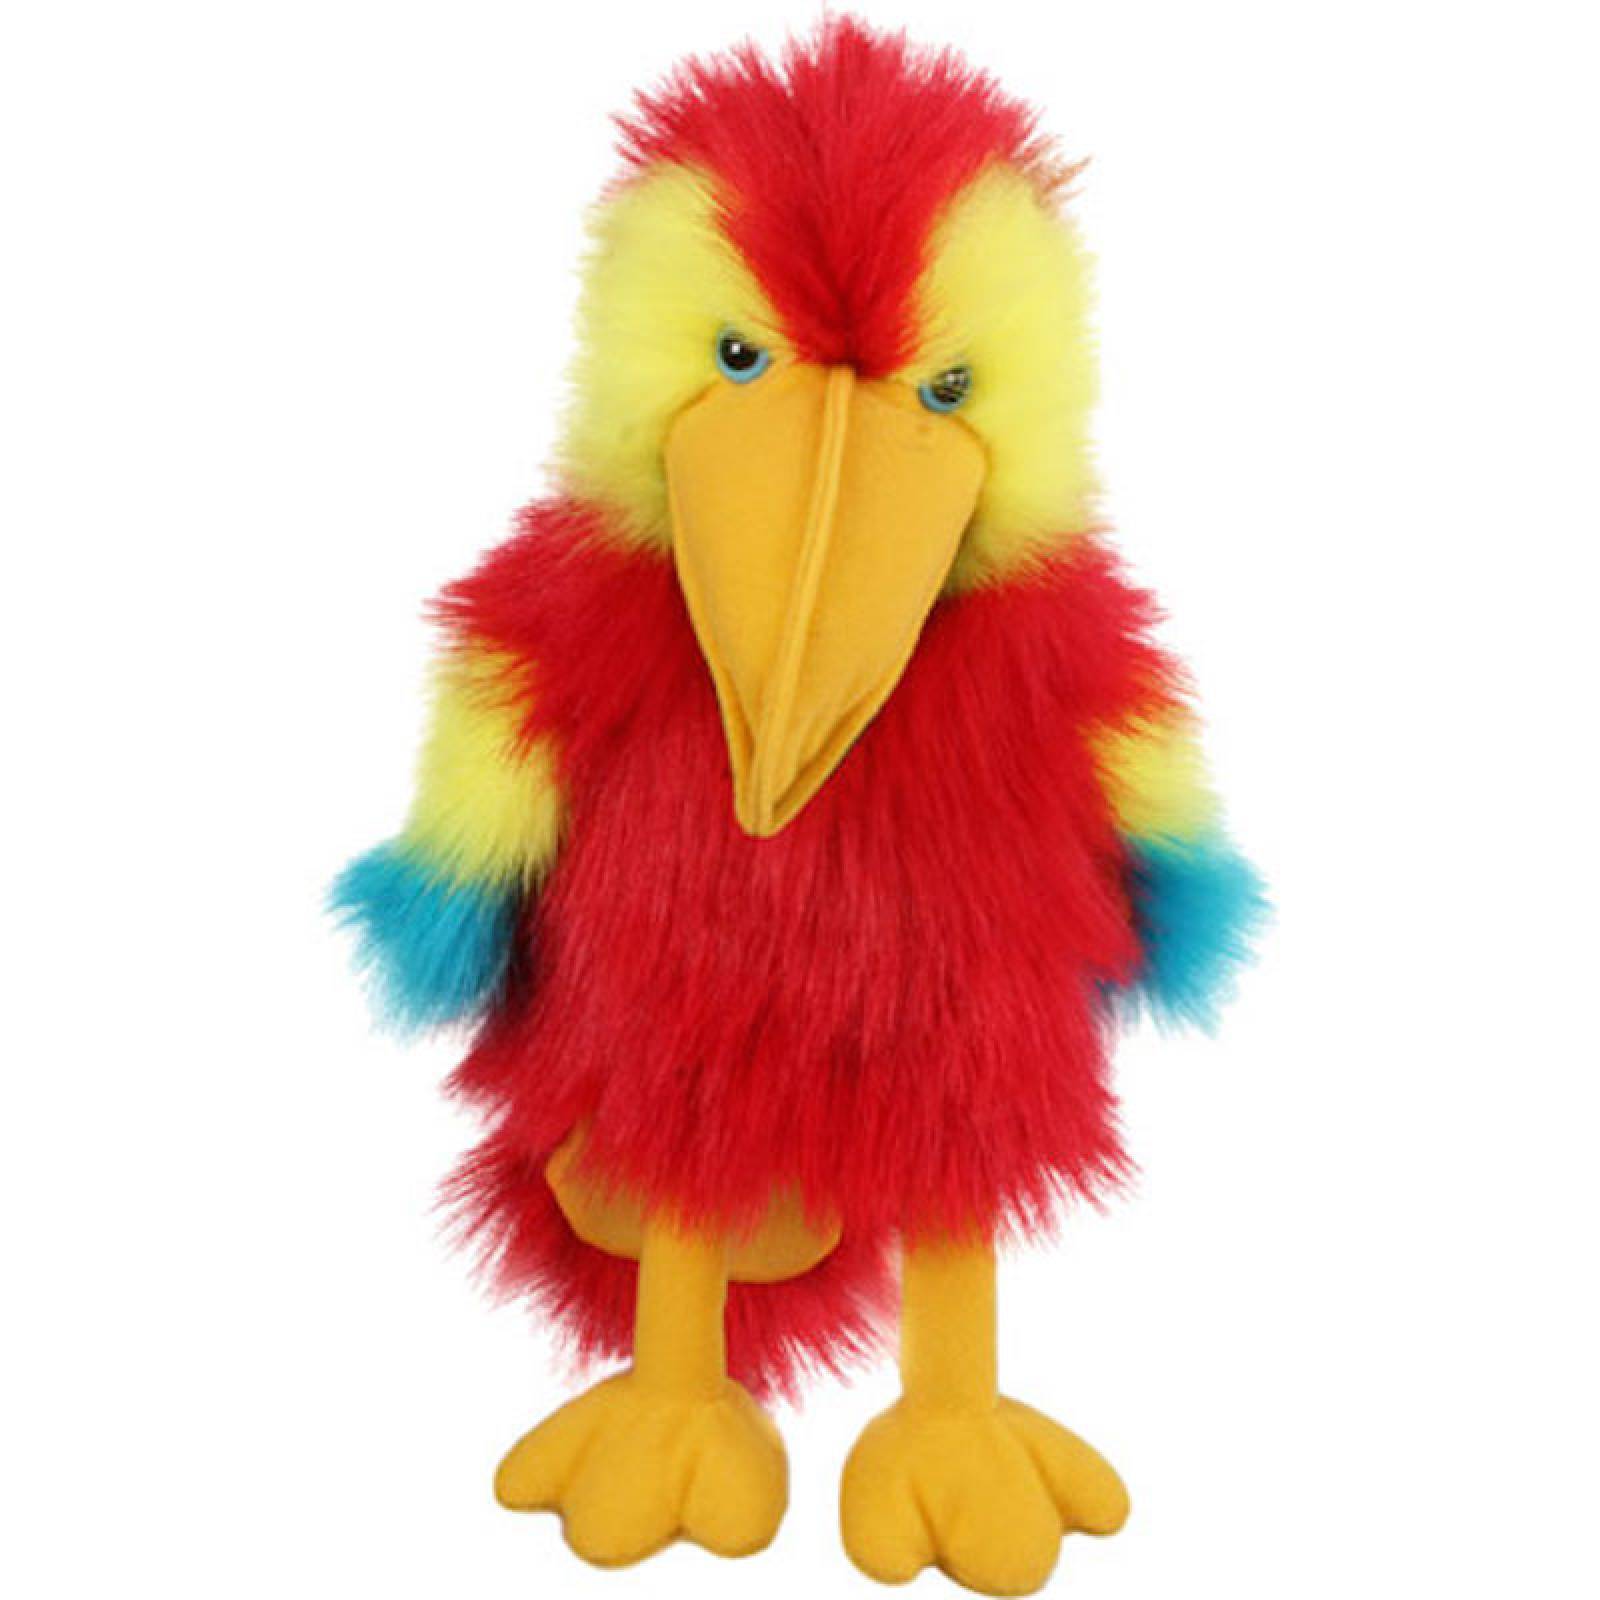 Scarlet Macaw Parrot Long Sleeved Glove Puppet Bird With Sound